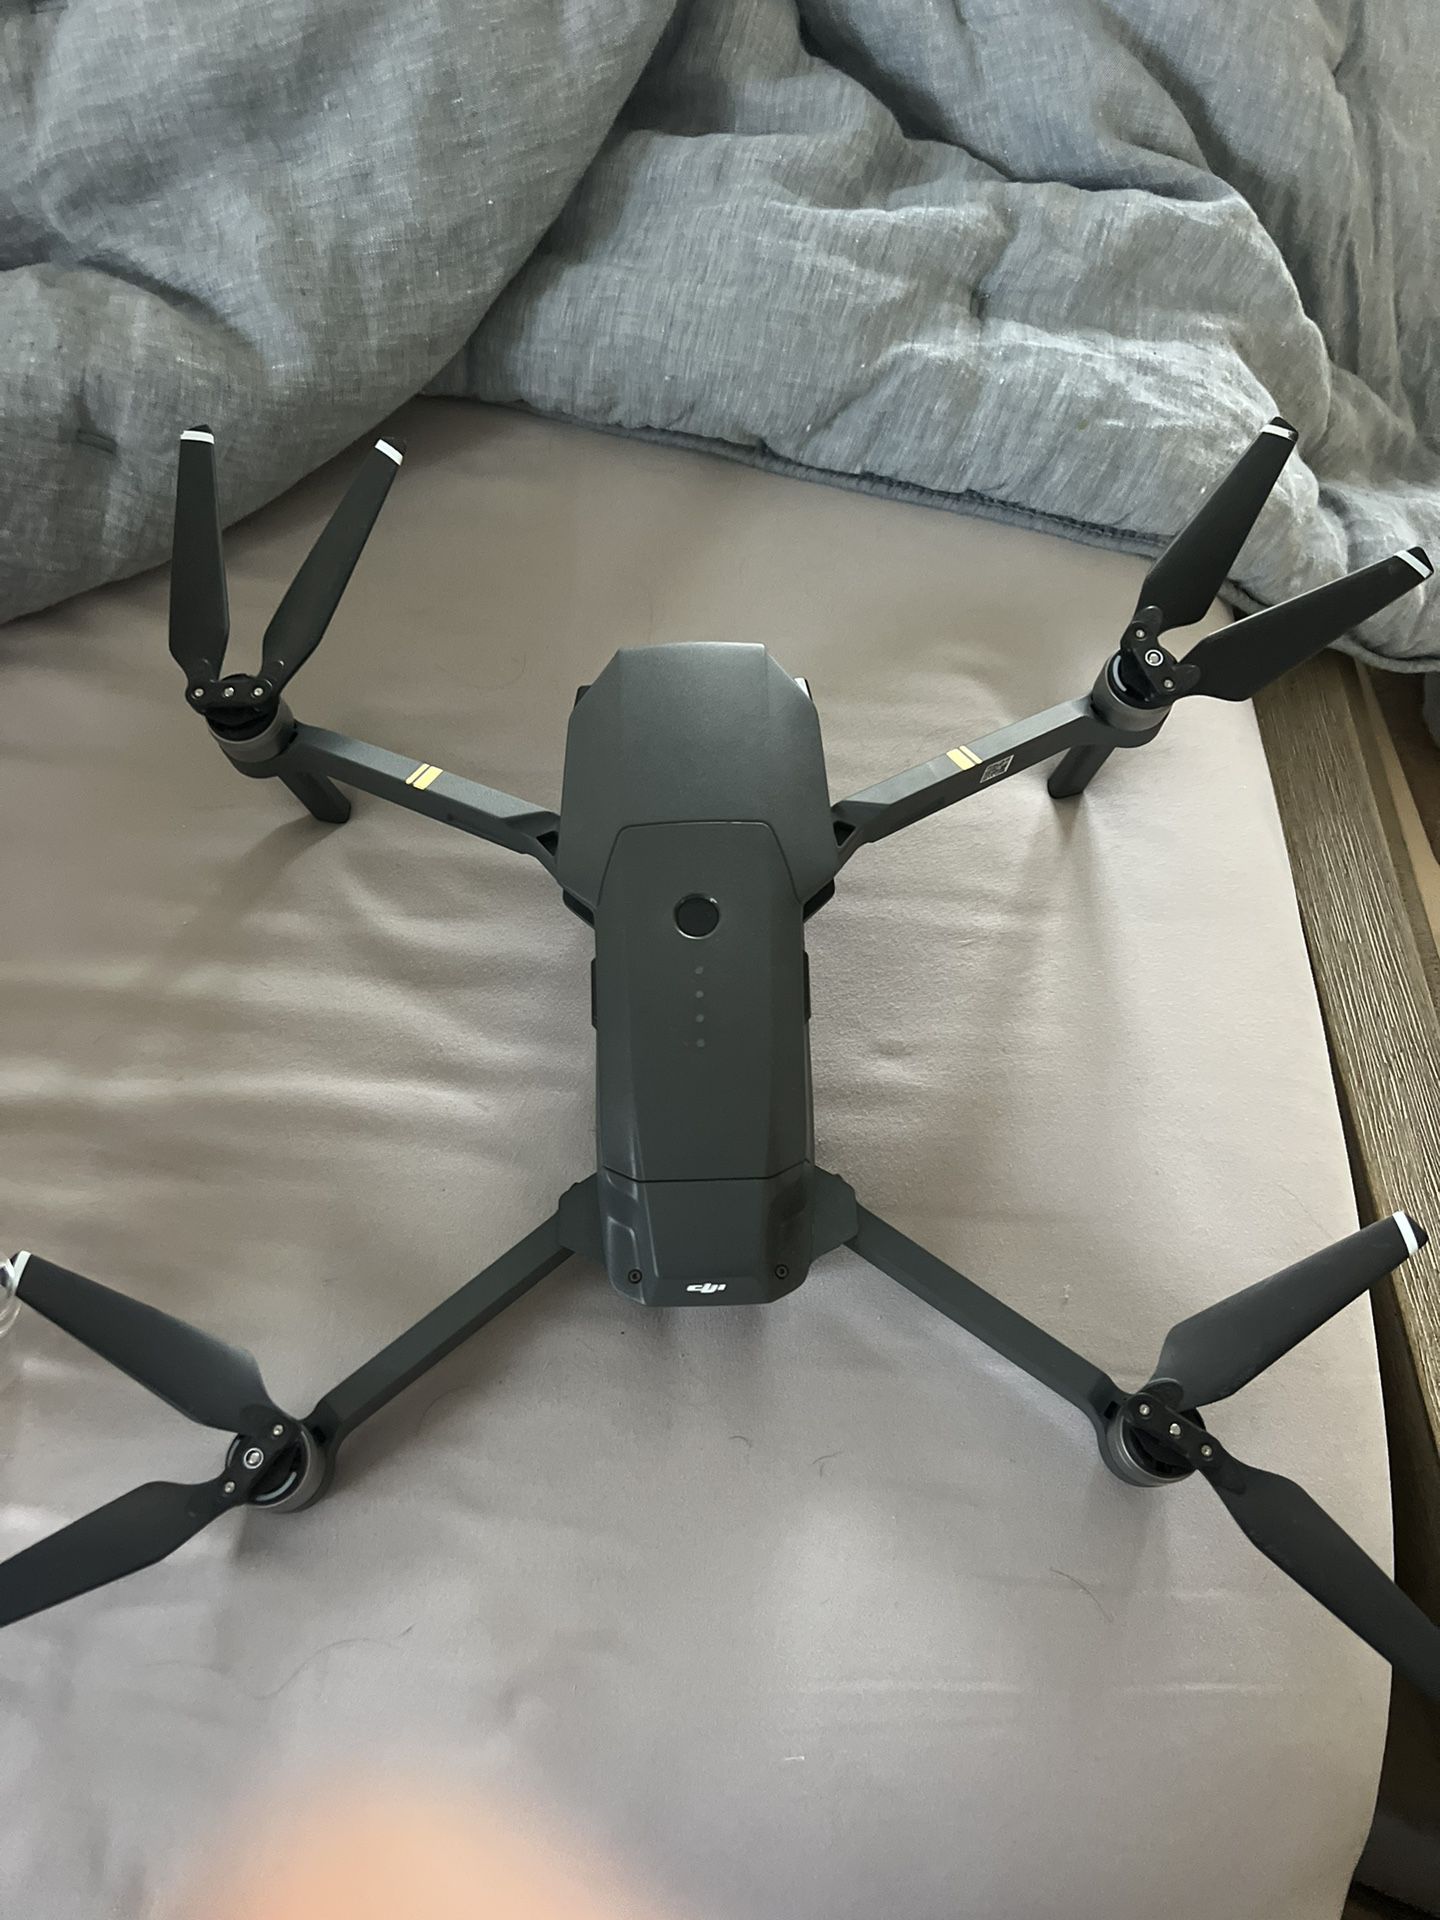 Drone Almost New Used Very Little 